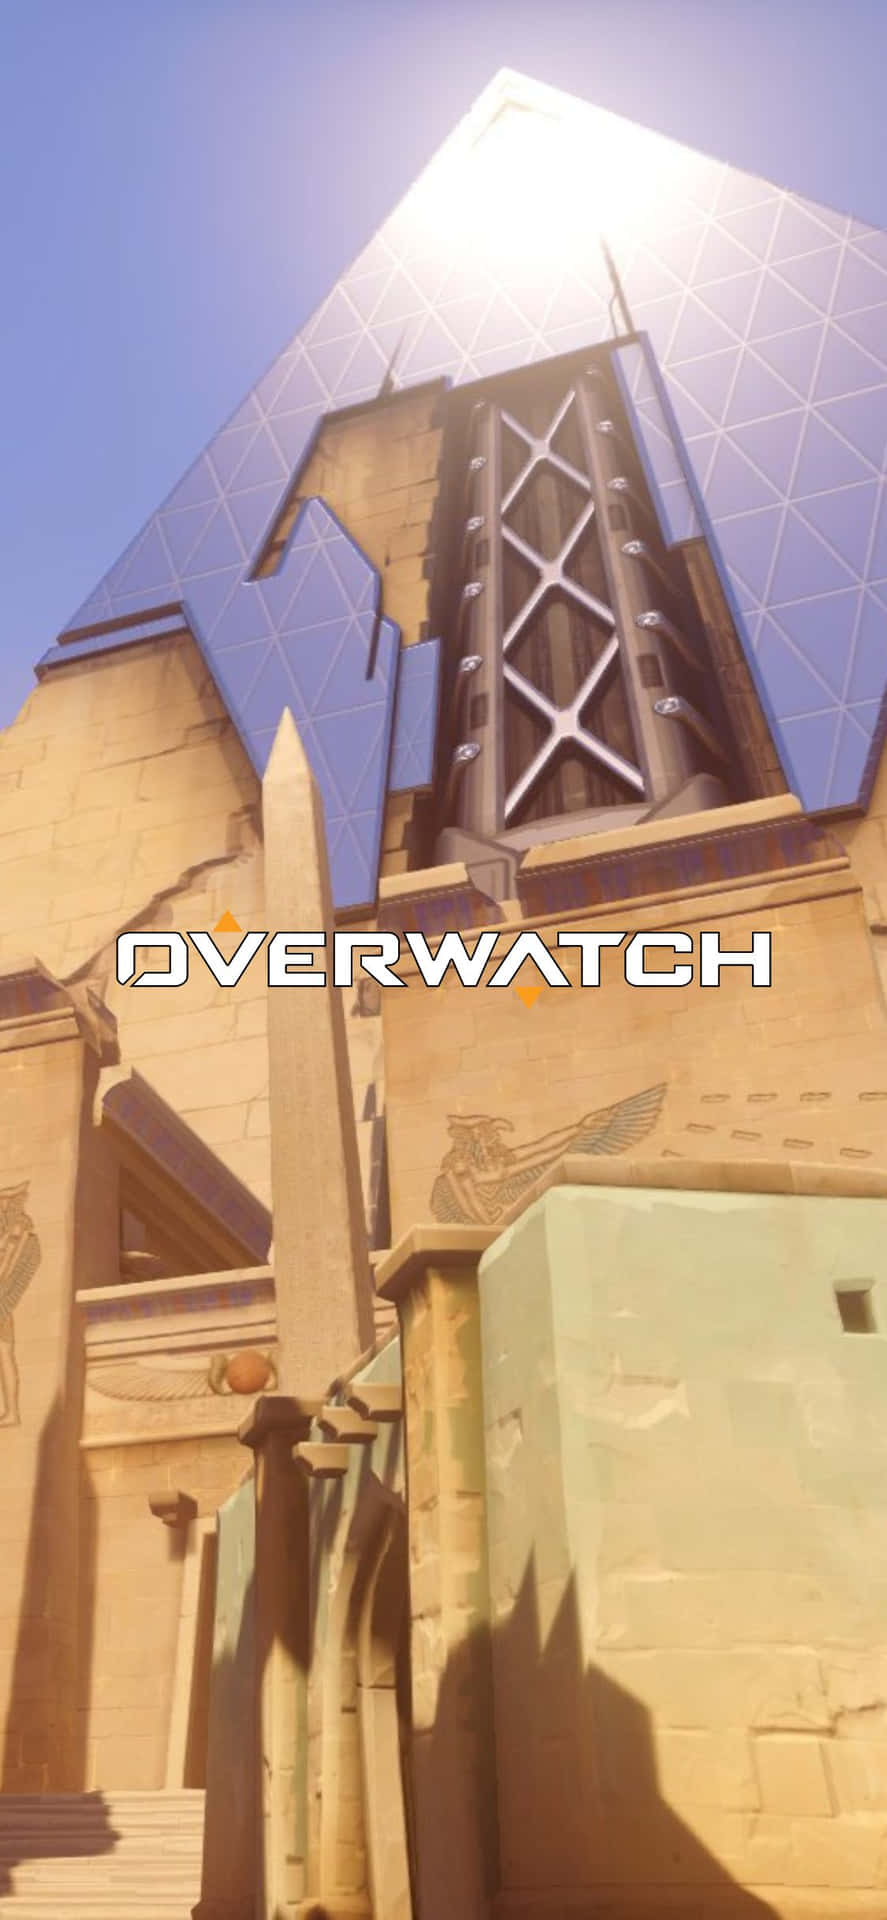 Overwatch - A Building With The Word Overwatch